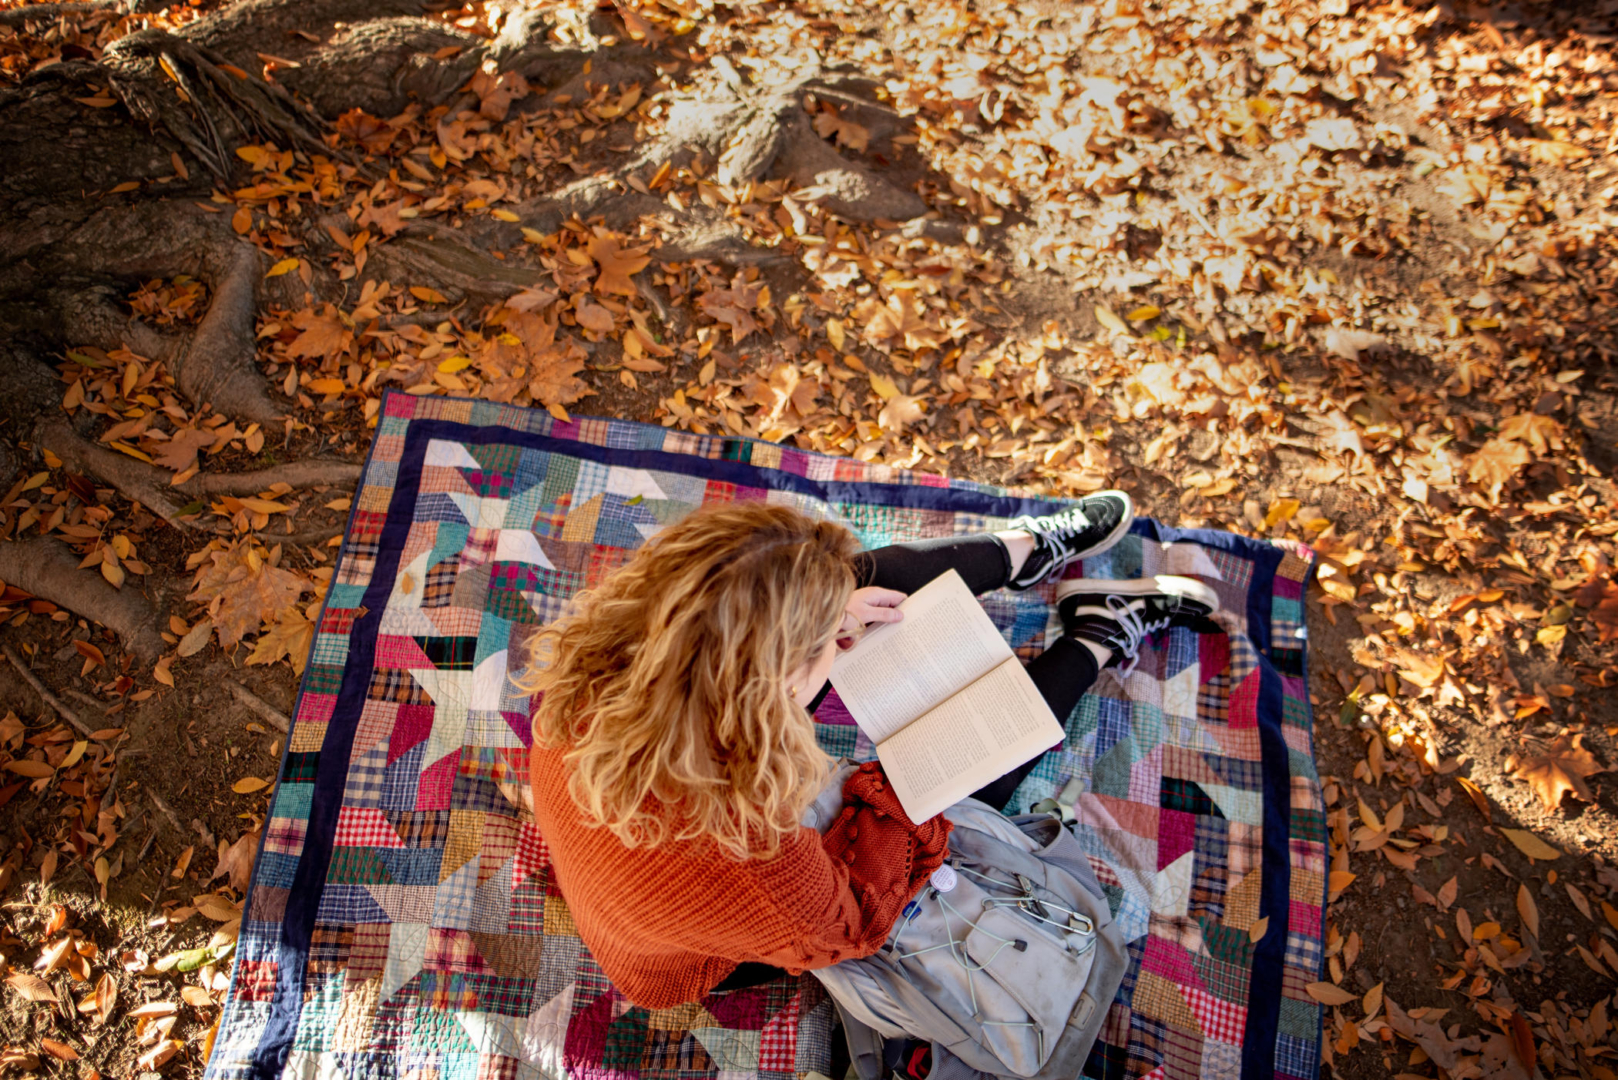 A student sits on a quilted blanket as she reads a book that is opened on her lap.